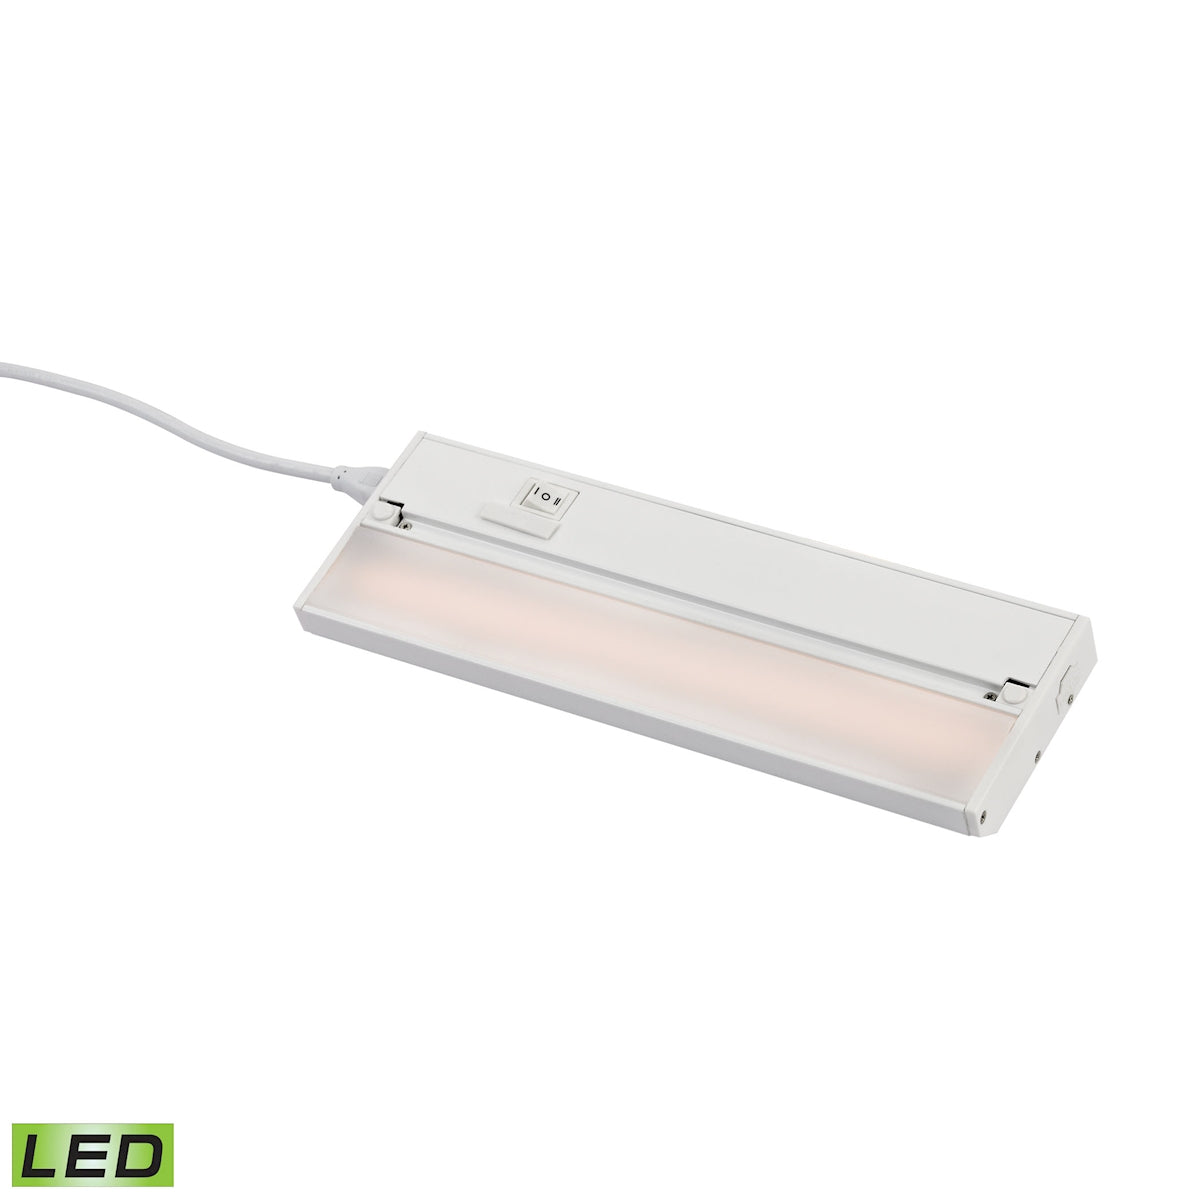 ELK Lighting LV012RSF ZeeLED Pro 1-Light Utility Light in White with Diffused Glass - Integrated LED